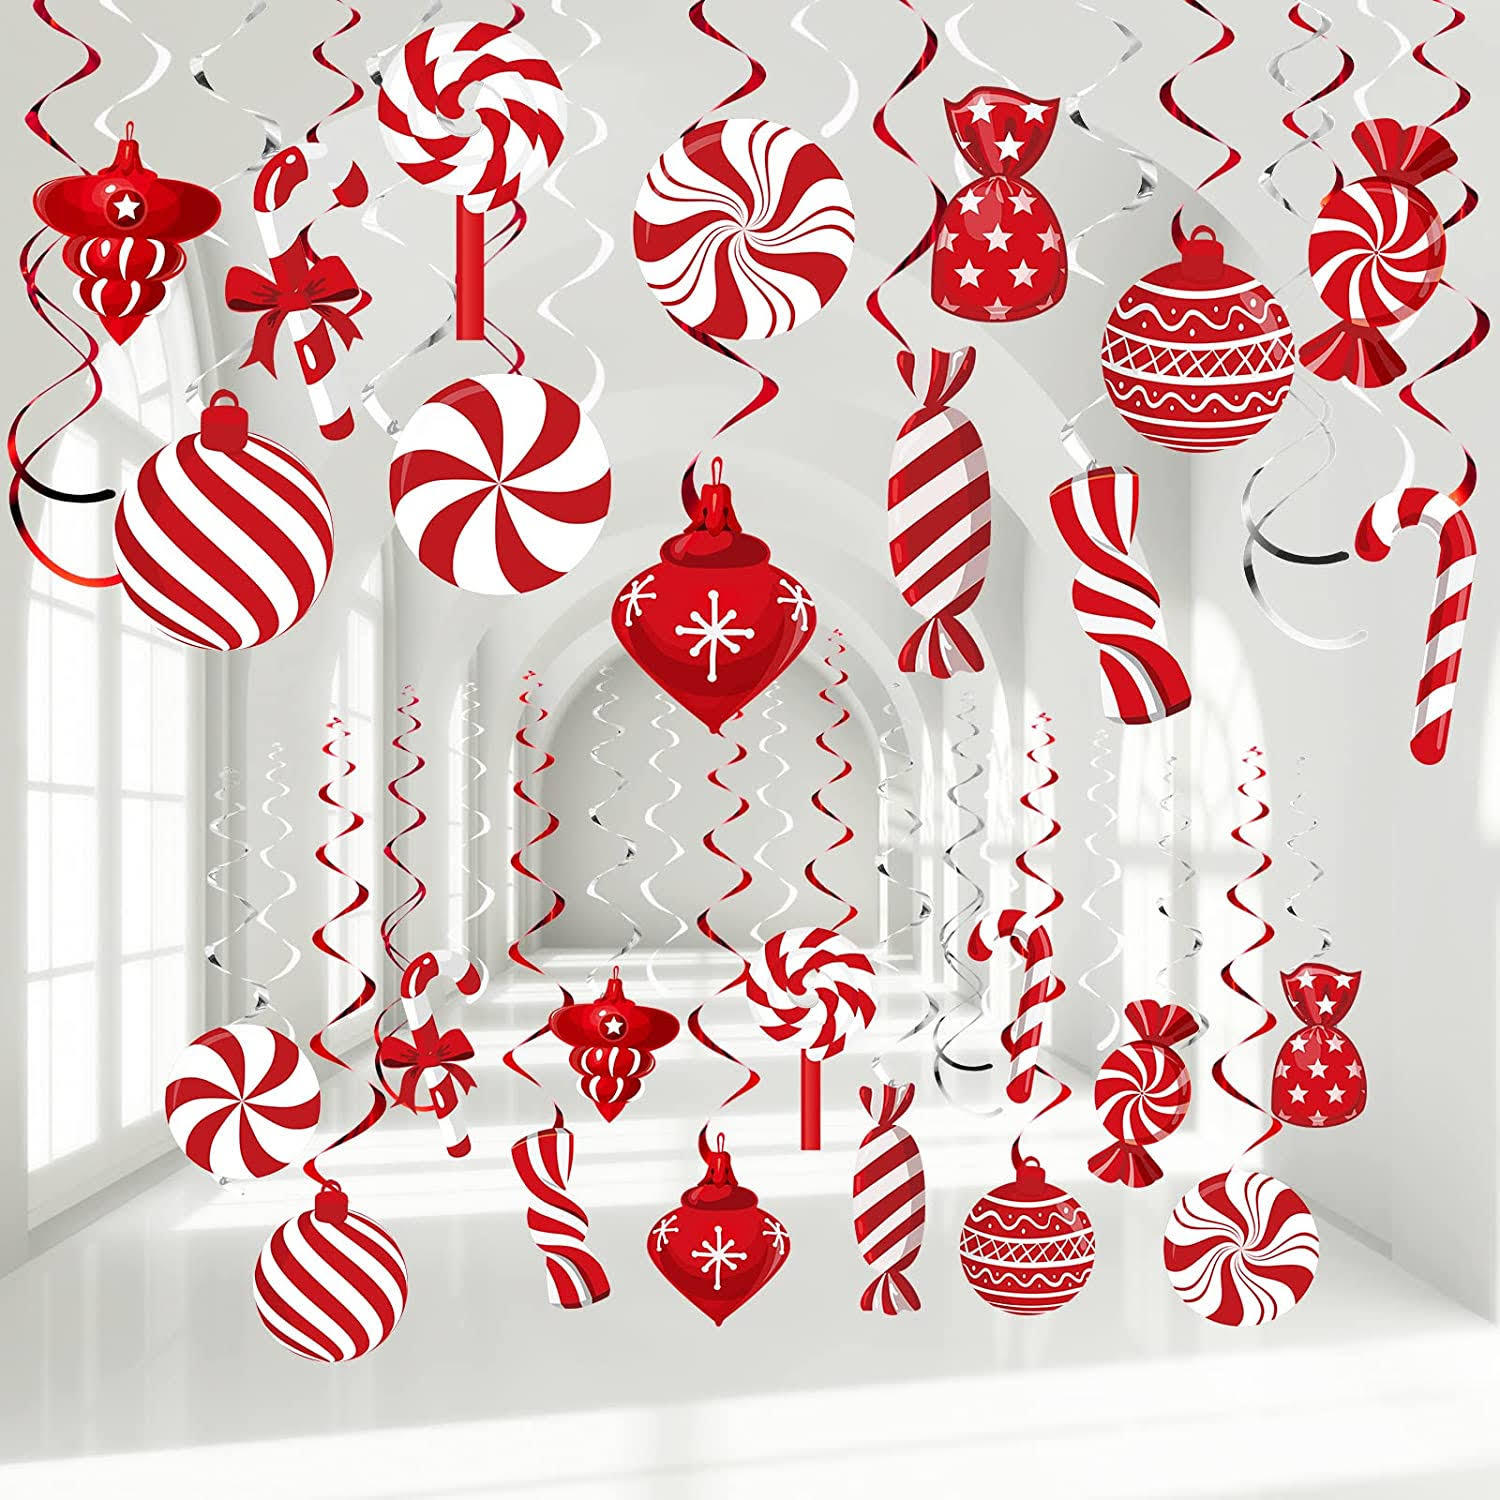 

26pcs Christmas Candy Spiral Design Decorations Hangers, Holiday Party Hanging Decorations, Outdoor Yard Decorations Ornaments